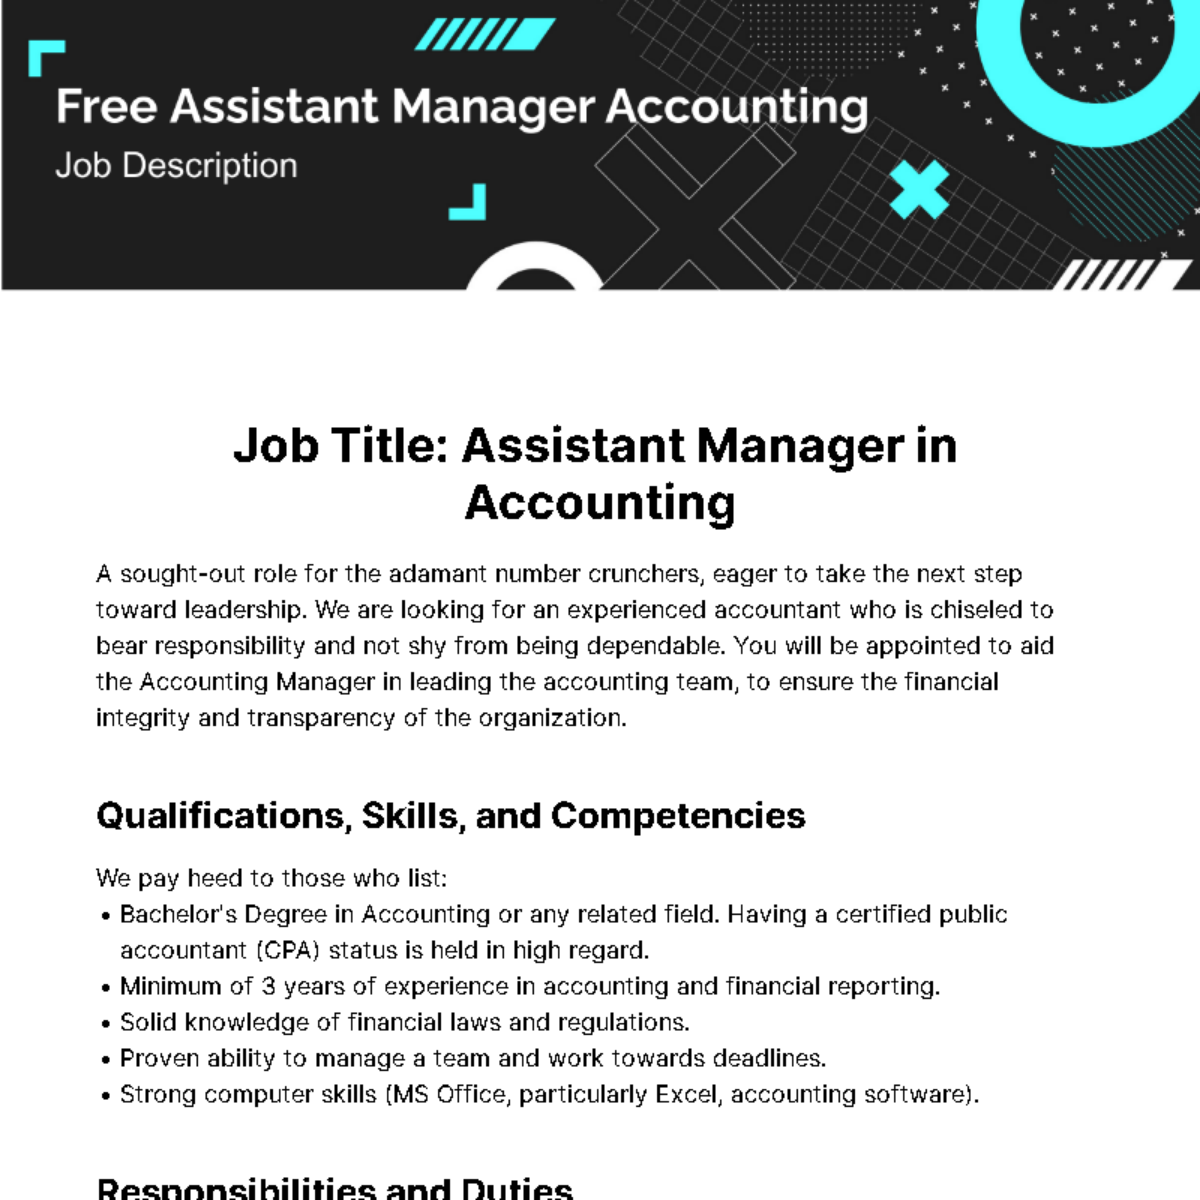 Assistant Manager Accounting Job Description Template